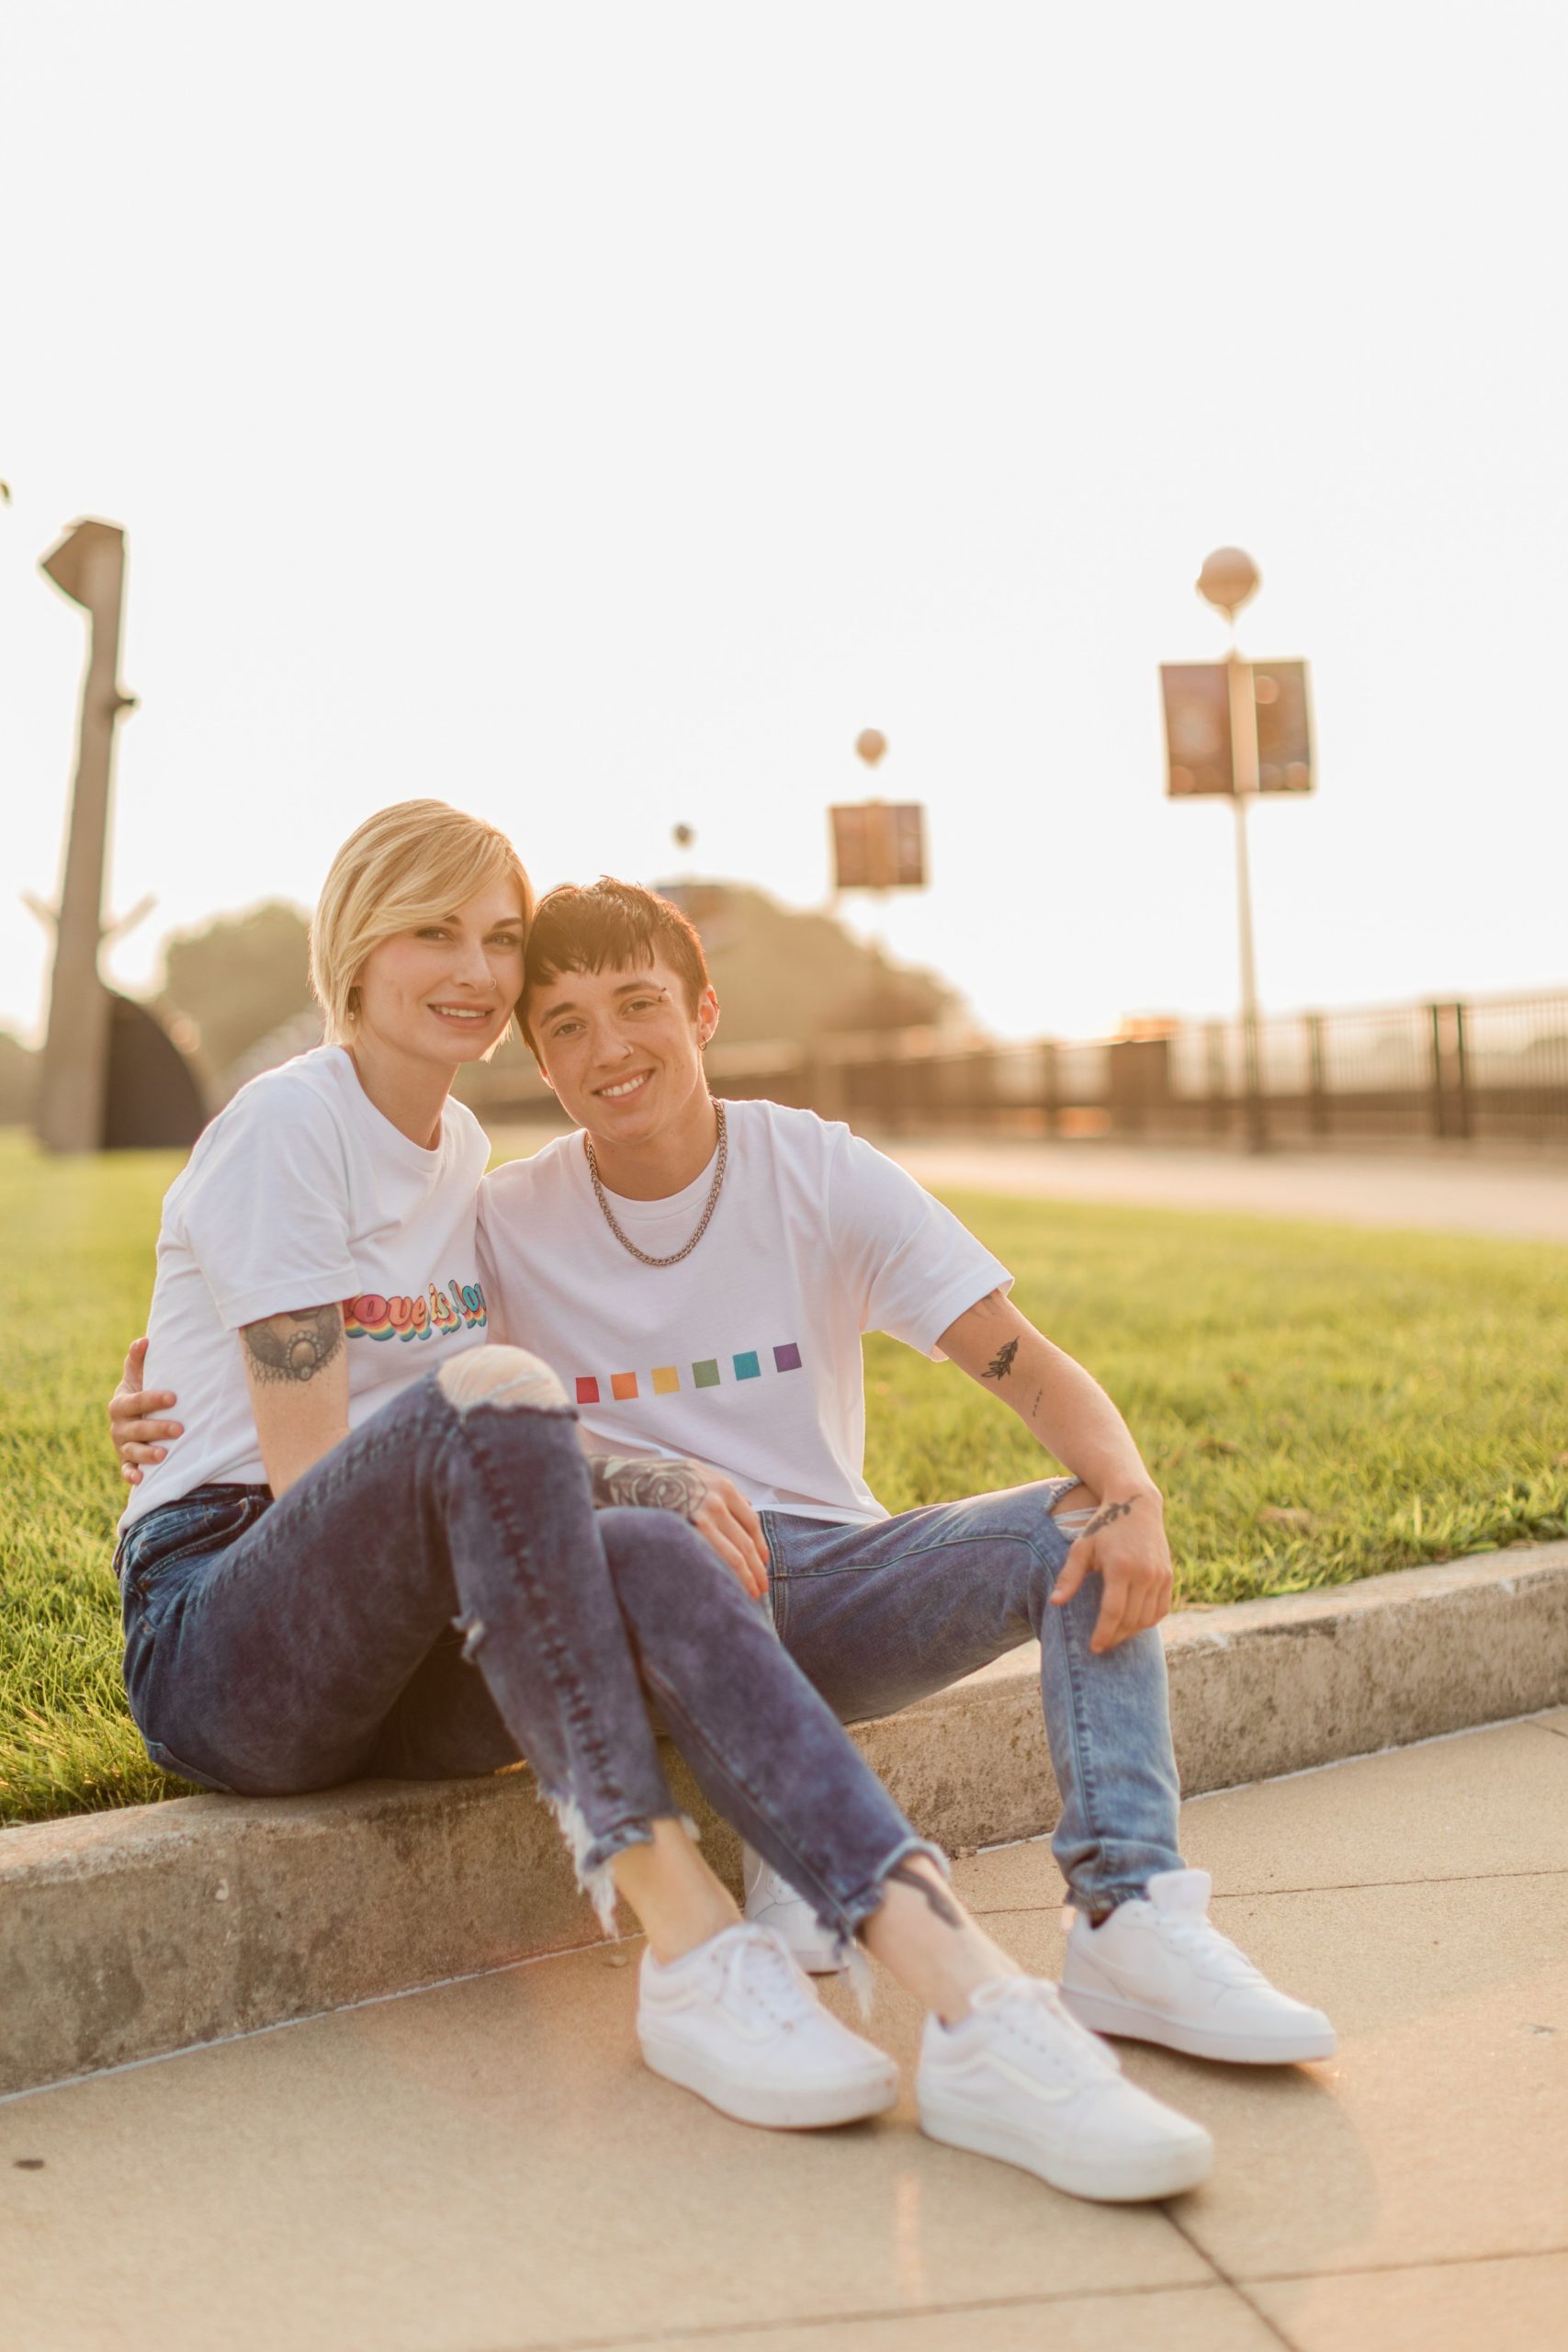 Couple sporting LGBTQ+ clothing during sunset